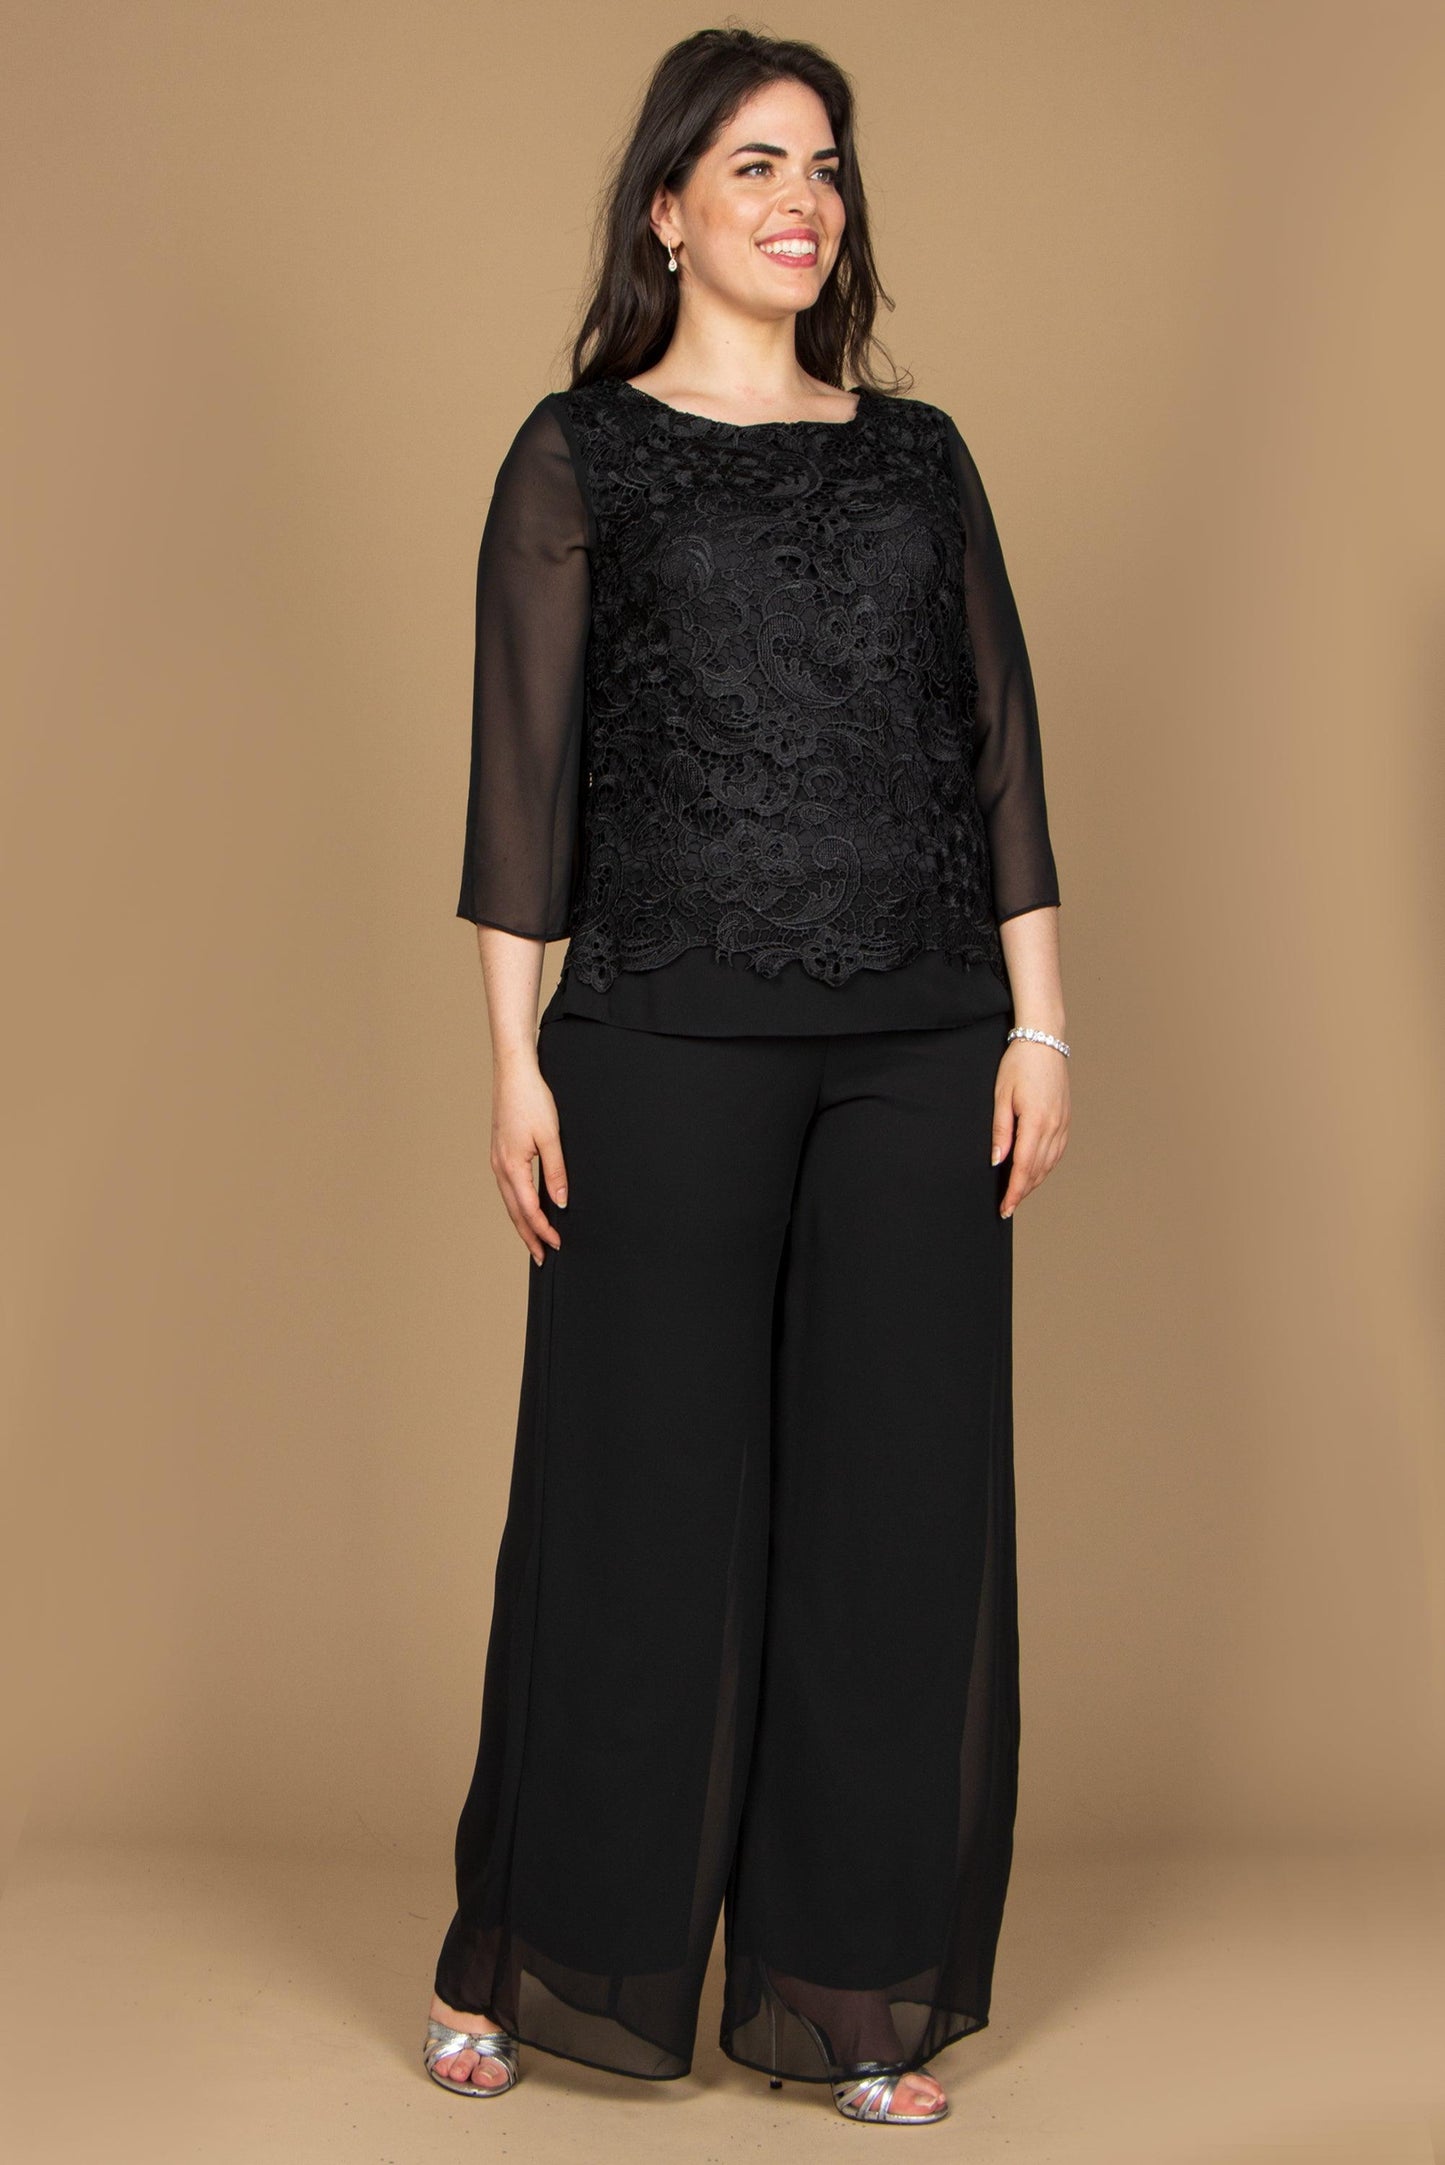 Formal Mother of the Bride Lace Pant Suit - The Dress Outlet